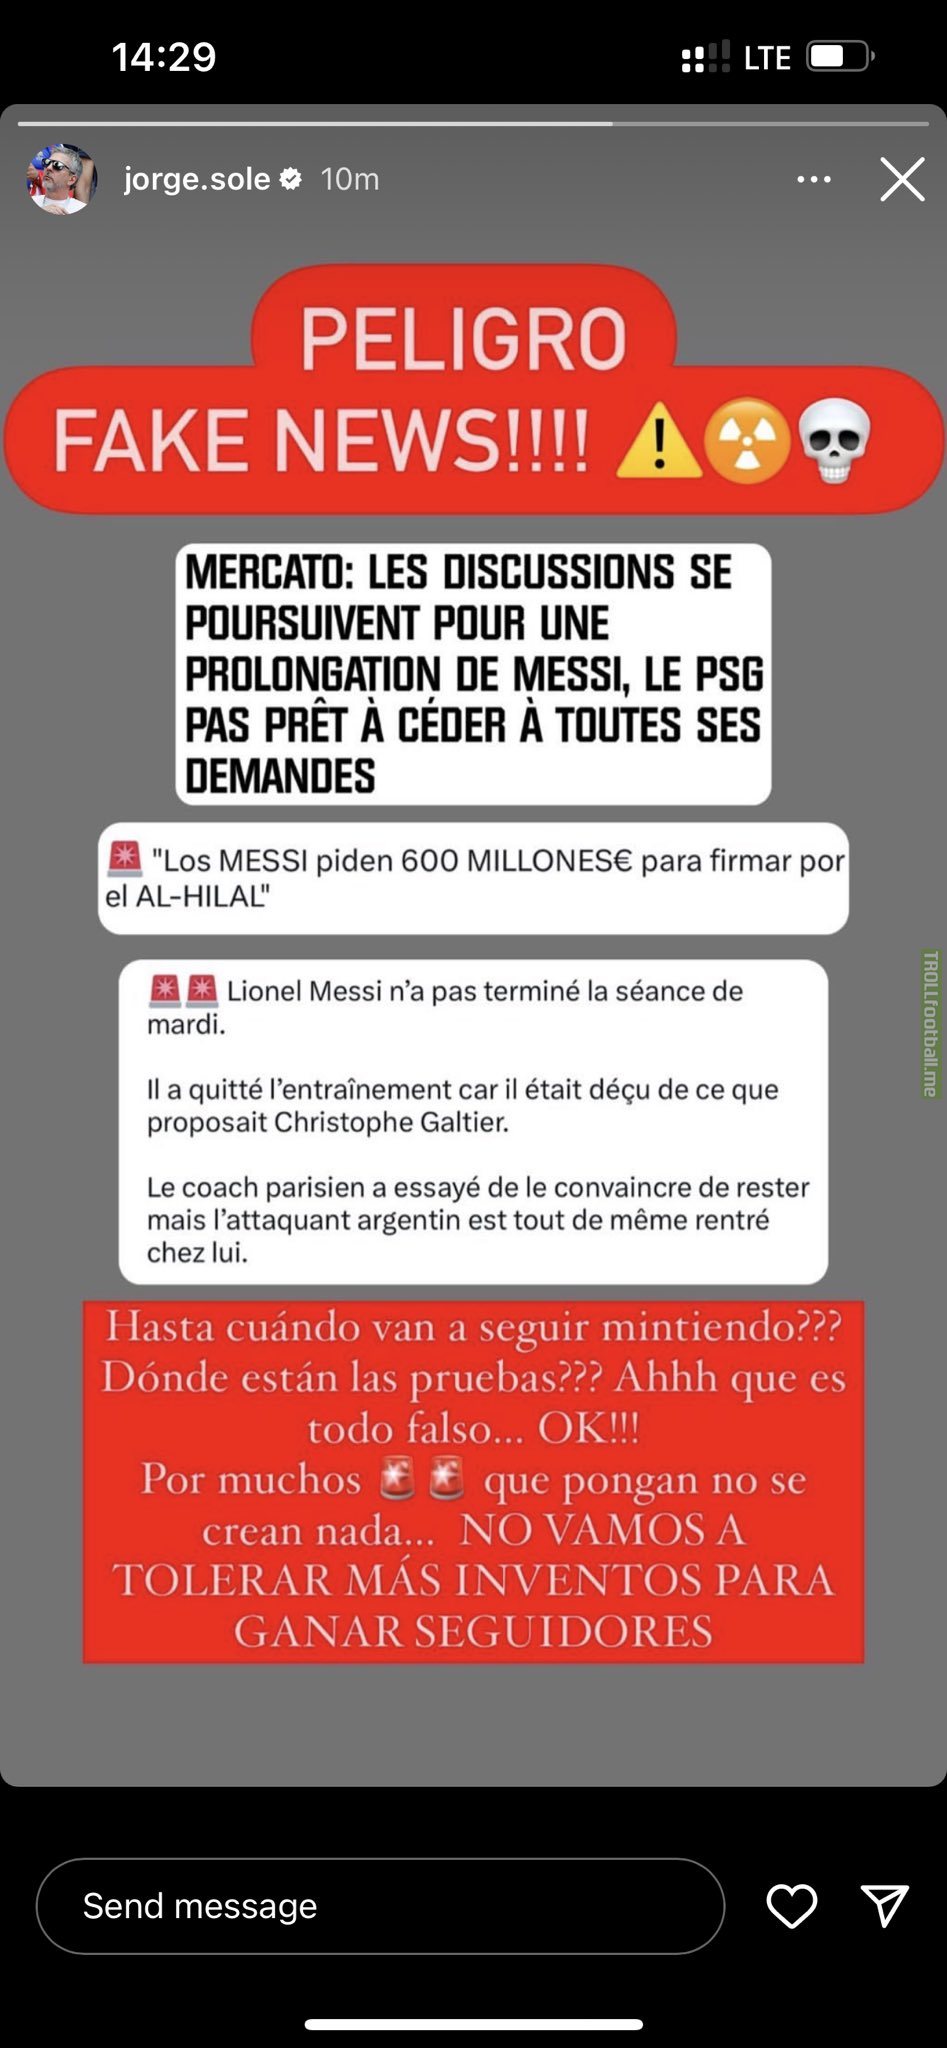 [Jorge Messi (Lionel's father) on Instagram] Fake news! We will no longer tolerate lies to gain followers. (News in picture about Messi getting a 600 million euro Al-Hilal offer, Messi demanding changes at PSG and Messi leaving the training session disappointed with Galtier)